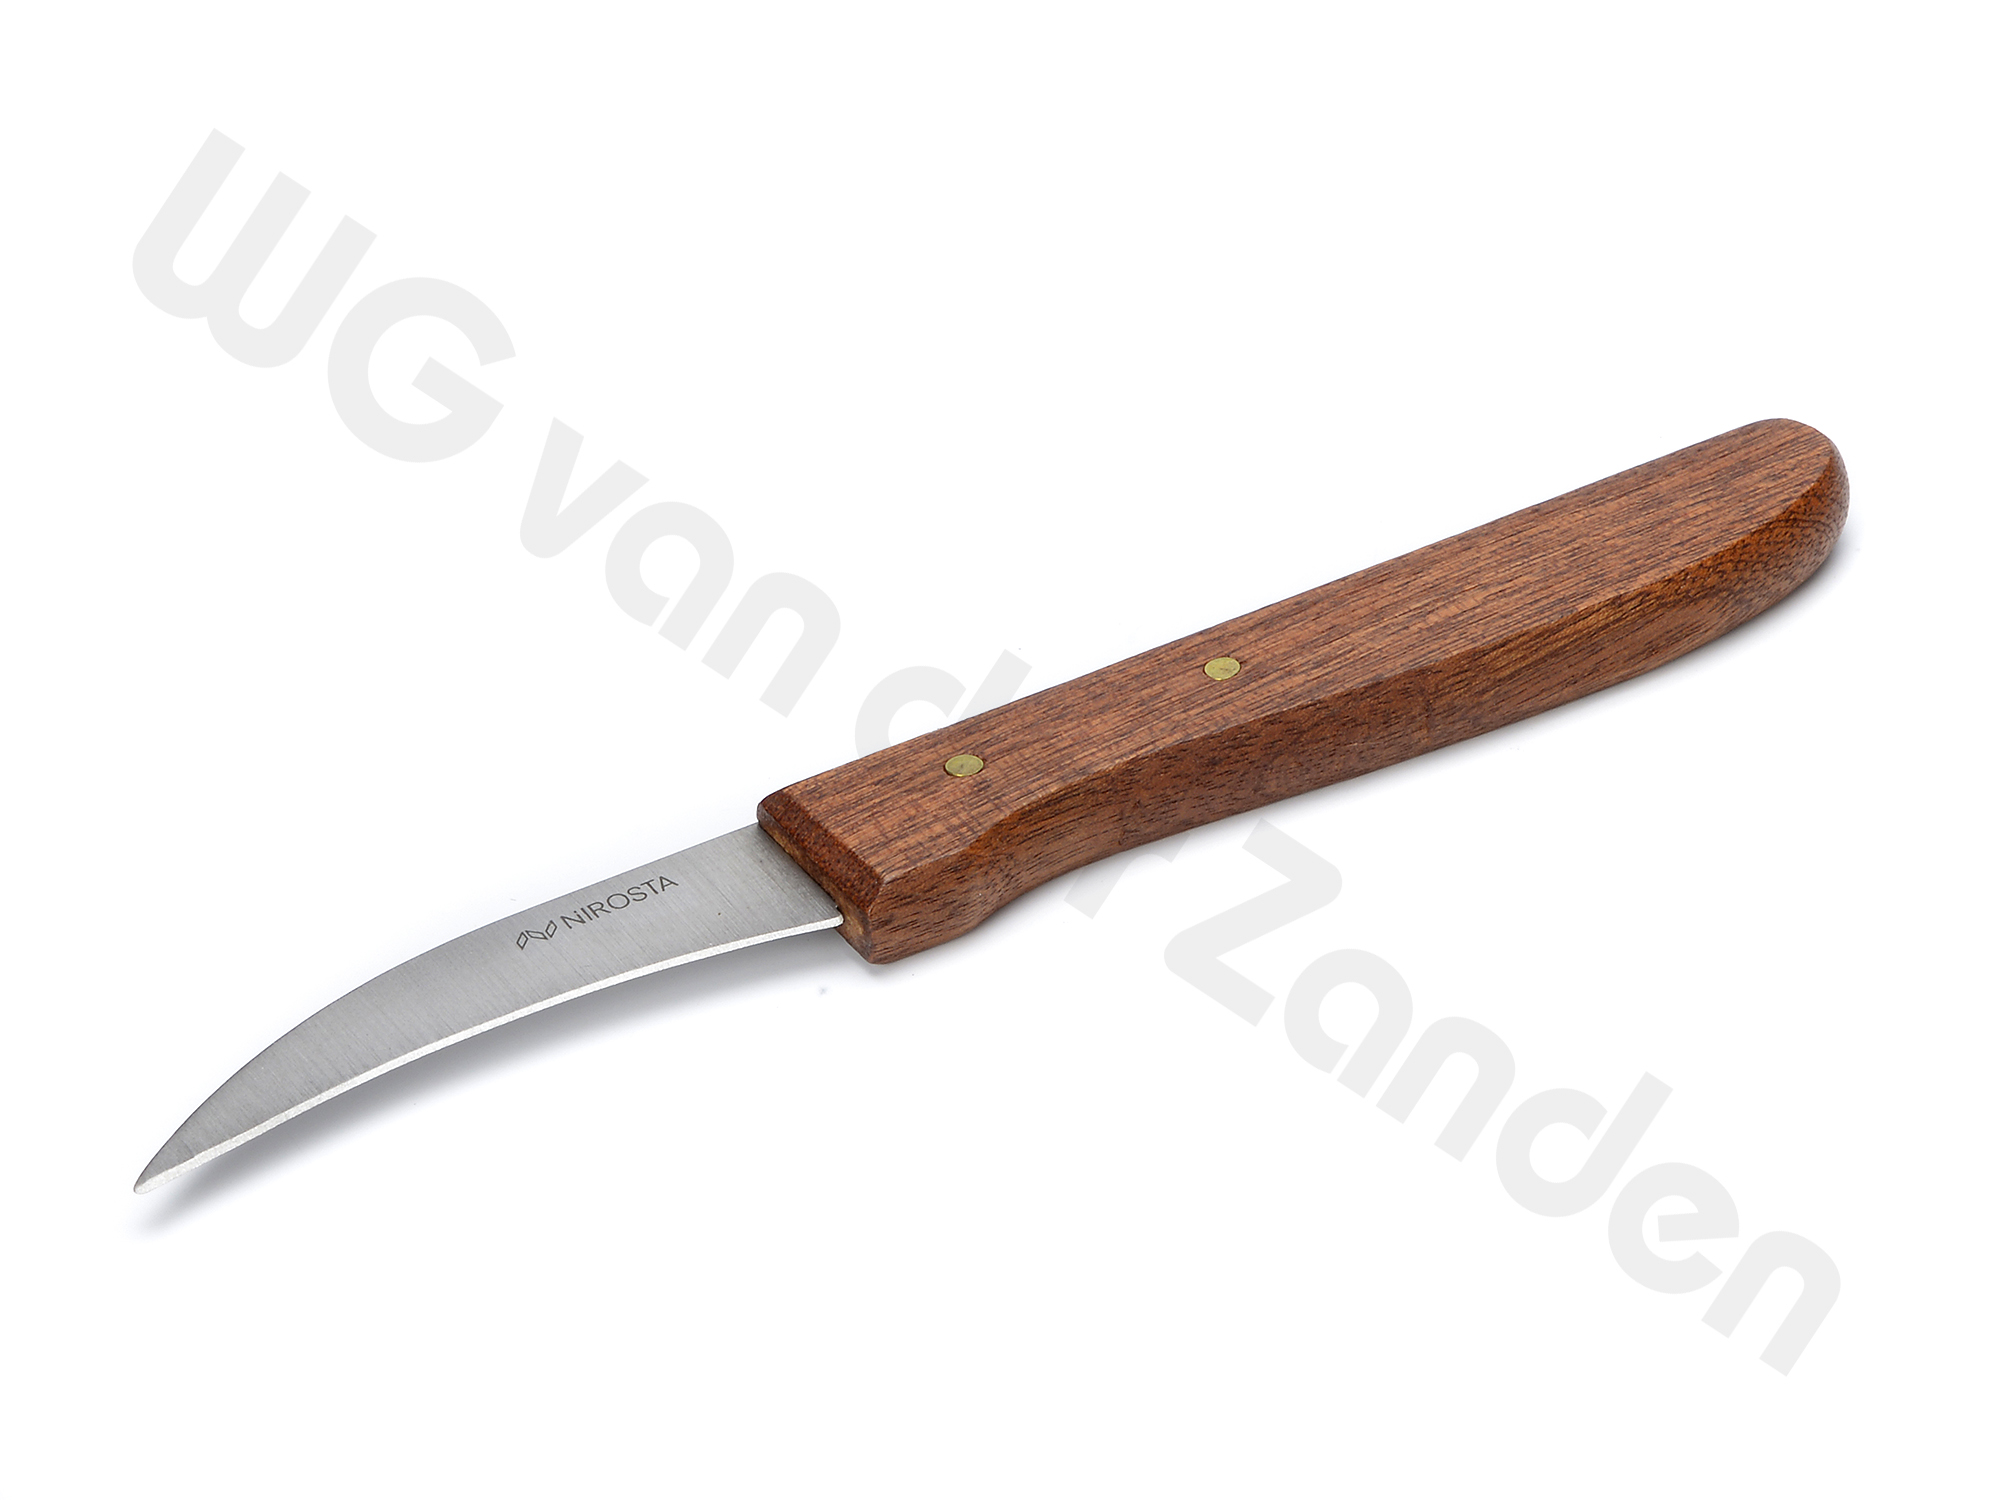 550020 PARING KNIFE 6CM CURVED BLADE WOODEN HANDLE